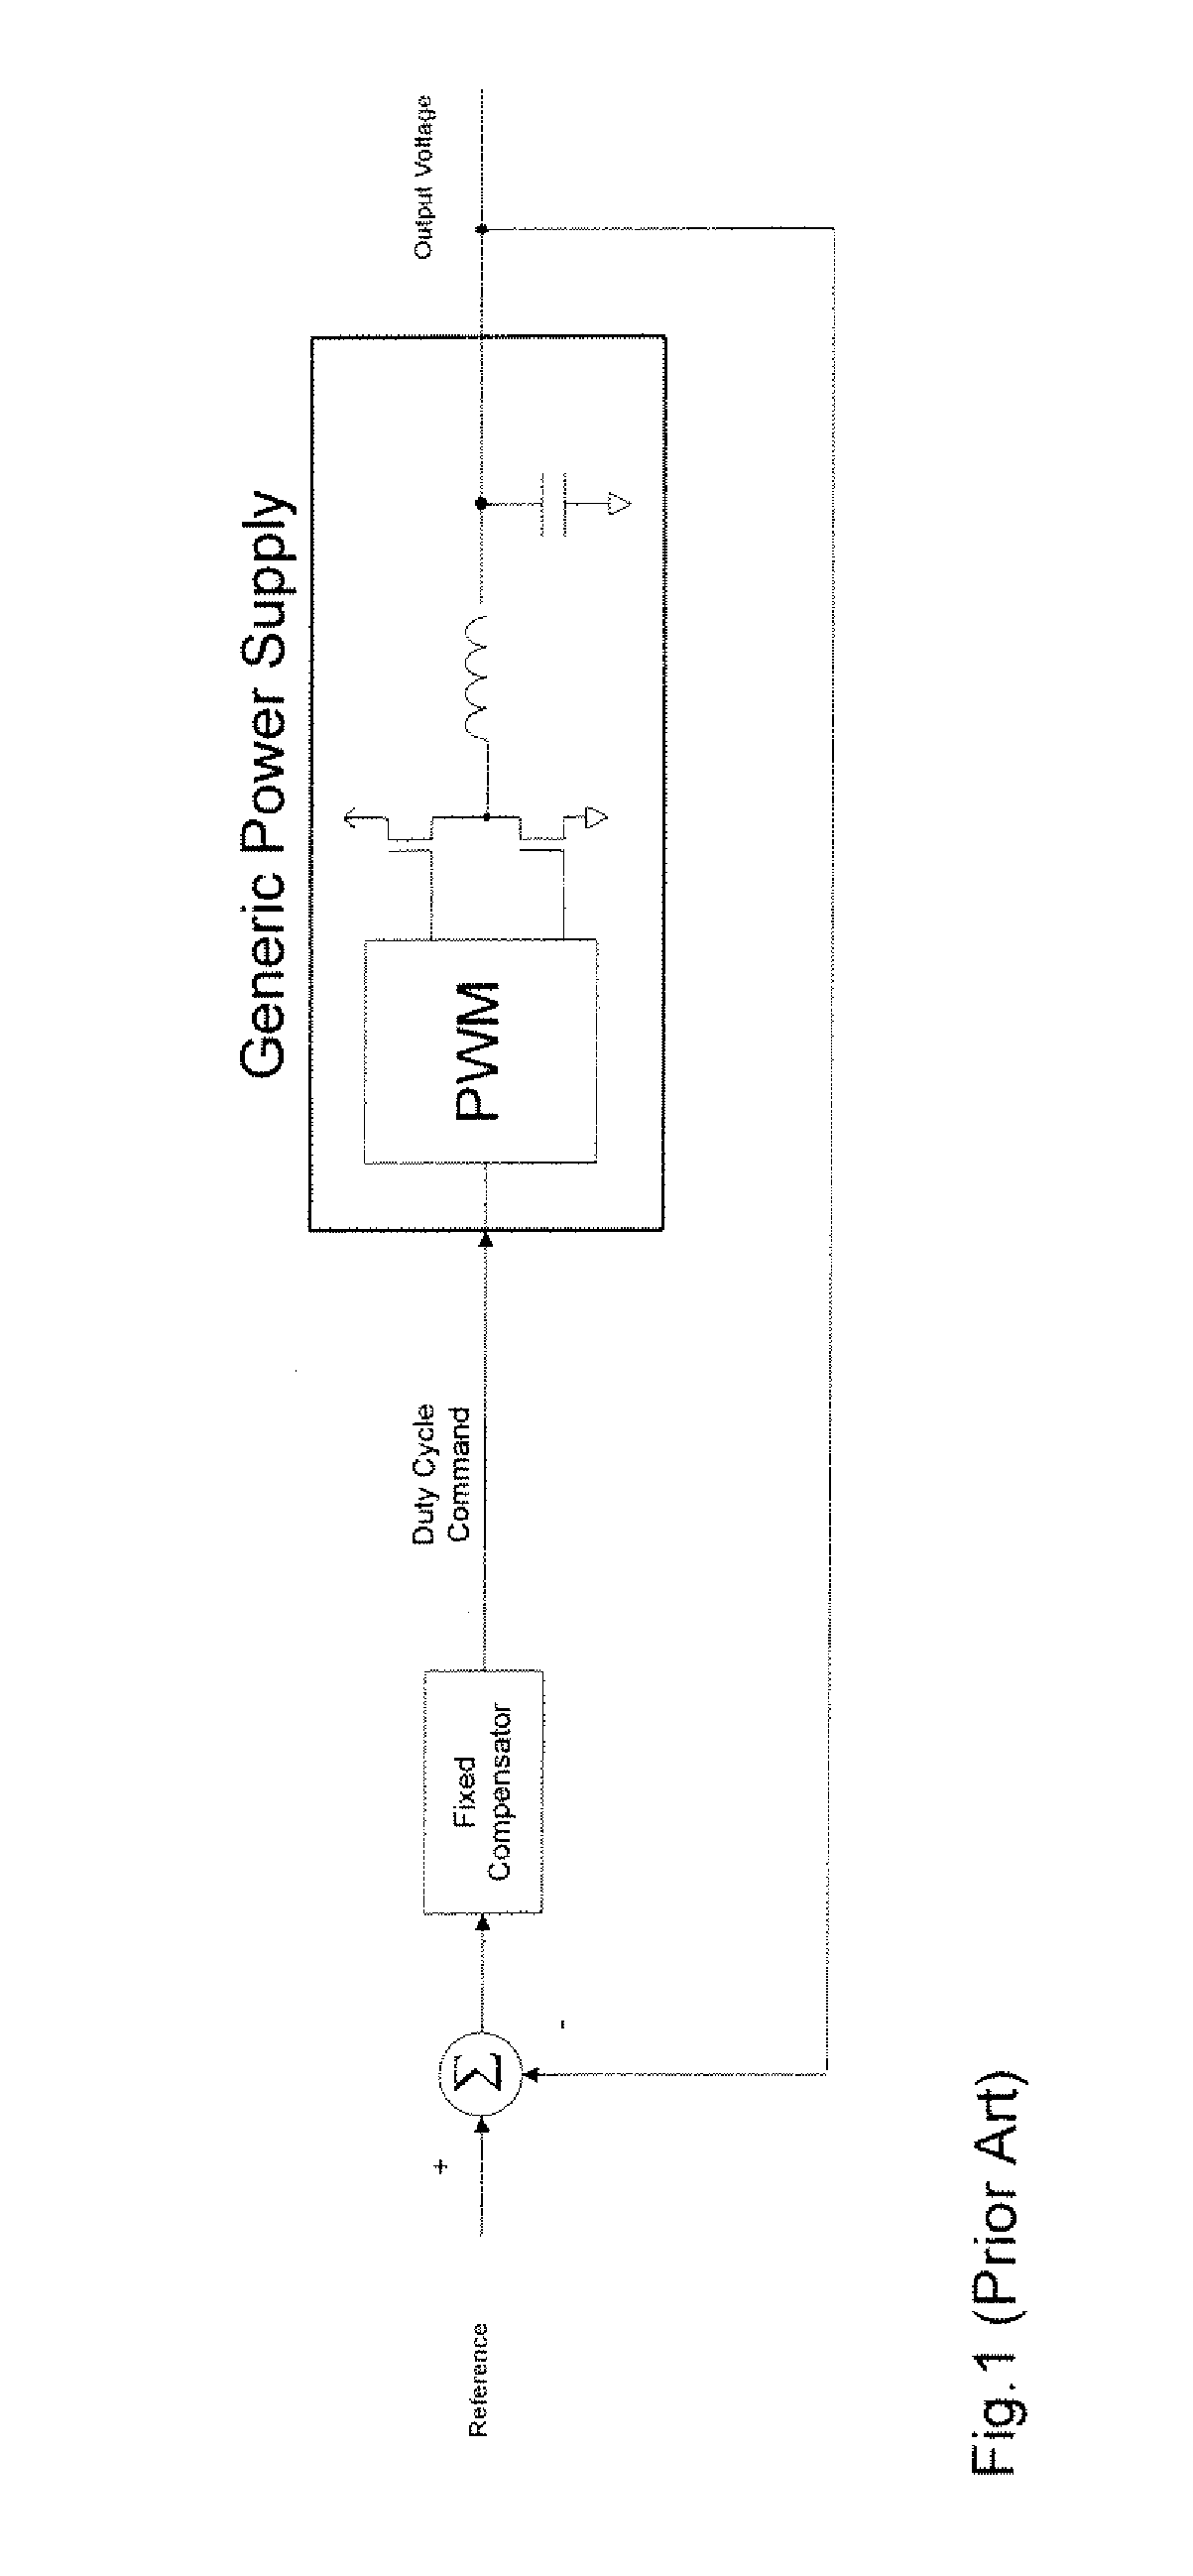 Non-linear controller for switching power supply